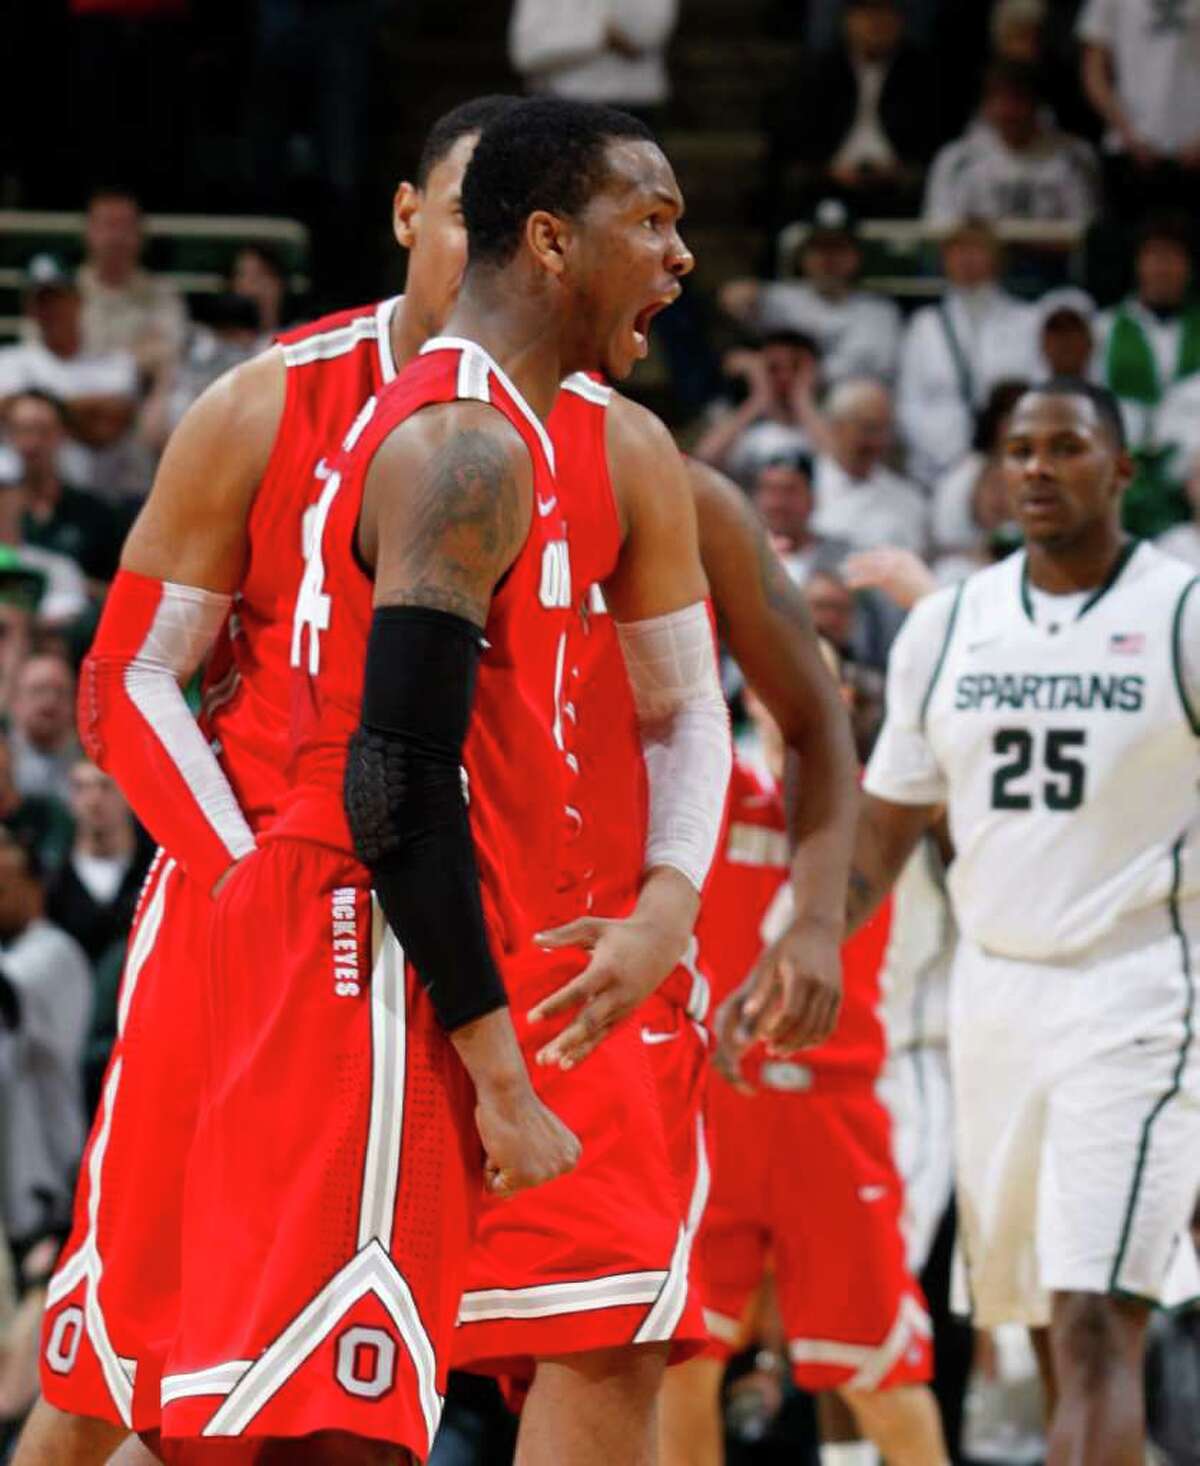 A jumper by William Buford (front) with one second remaining gave No. 10 Ohio State a 72-70 win over Michigan State.